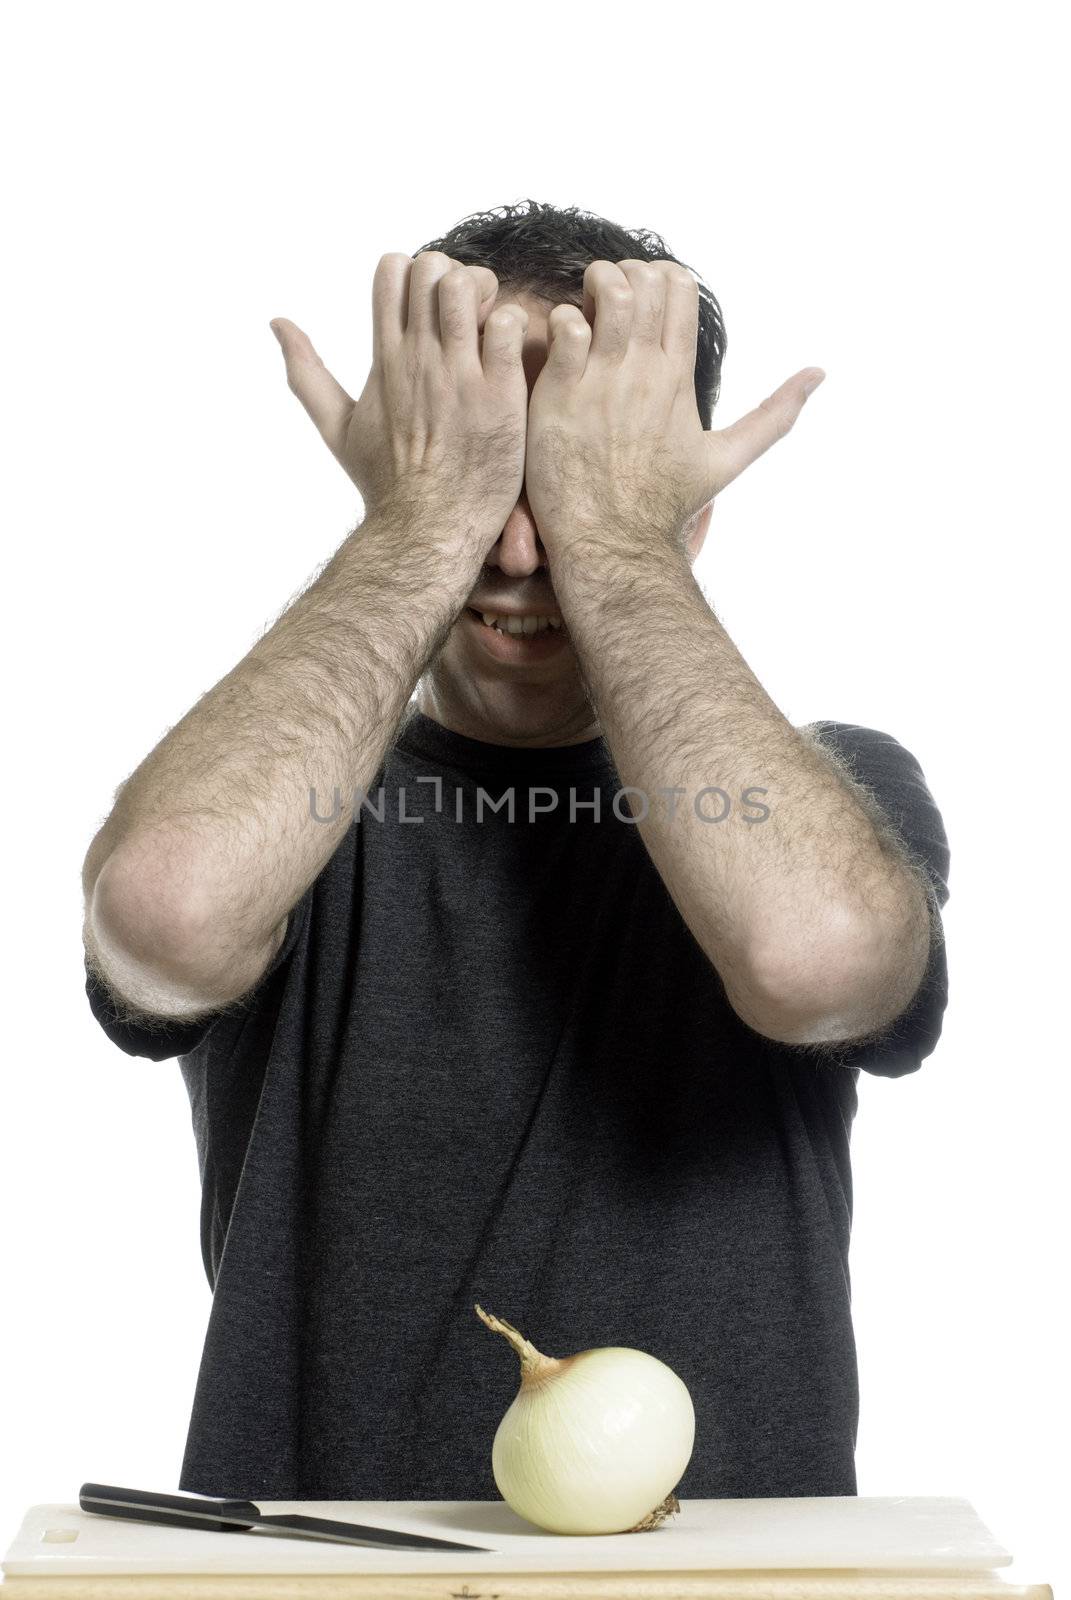 A young man holding his eyes in pain without even starting to cut the onion, isolated against a white background